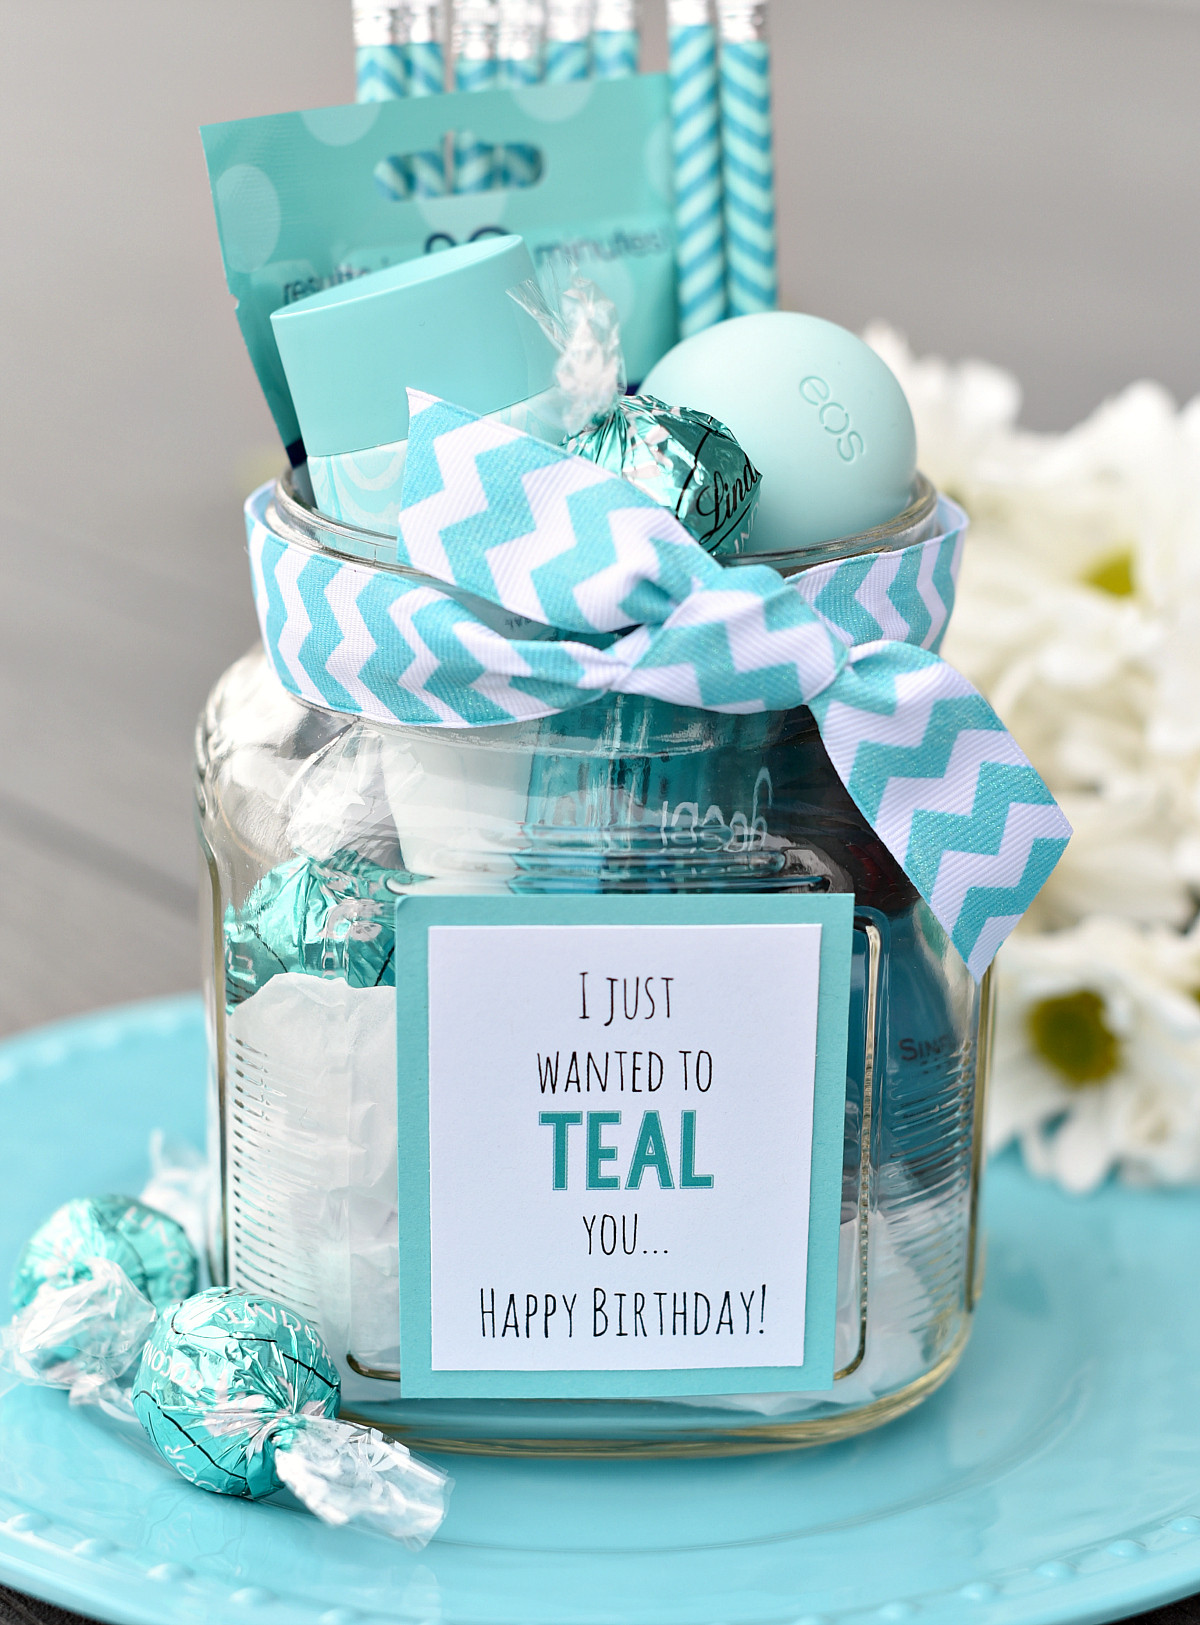 Gifts For Birthday
 Teal Birthday Gift Idea for Friends – Fun Squared